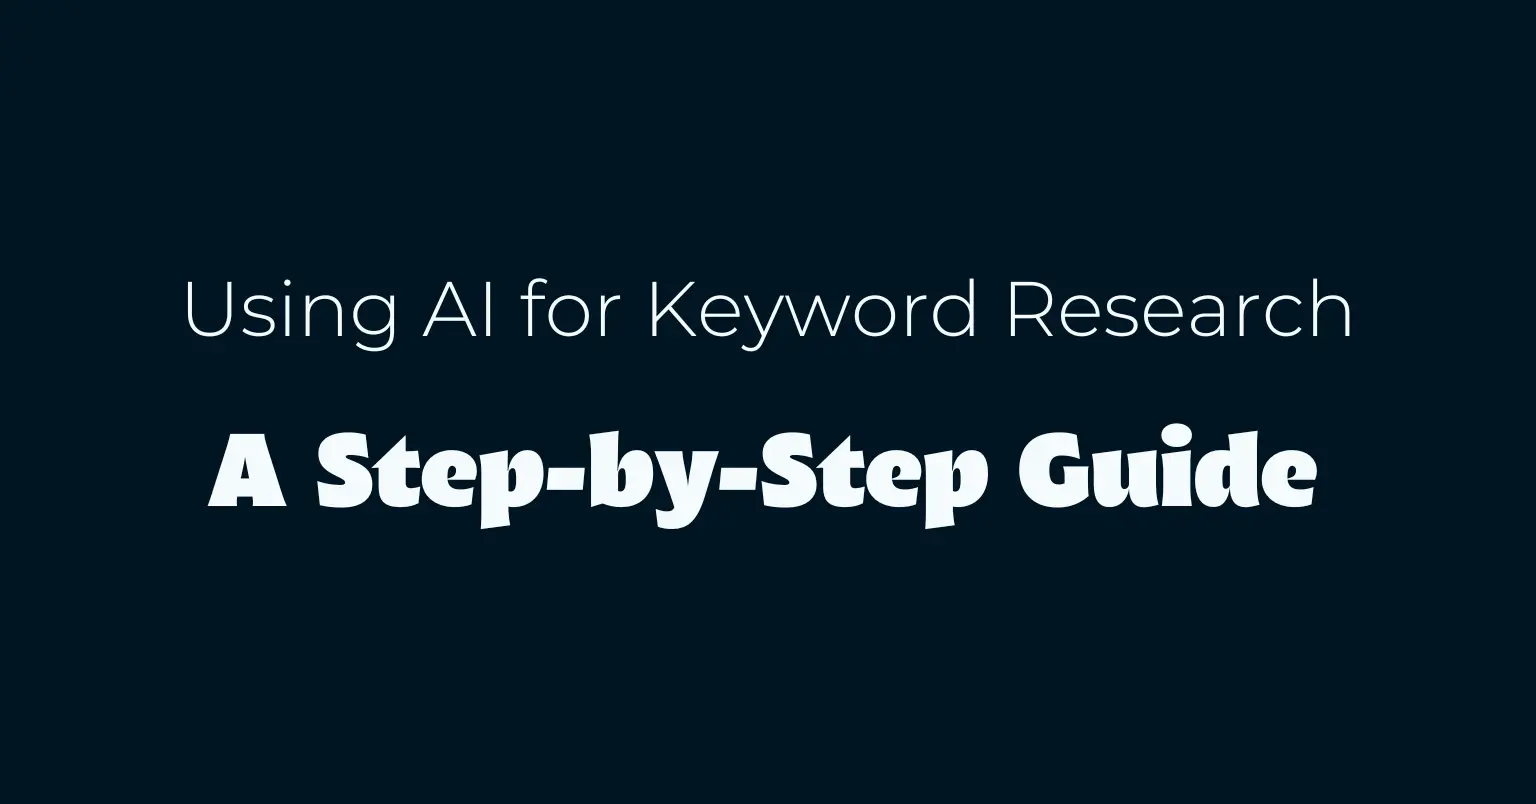 Using AI for Keyword Research